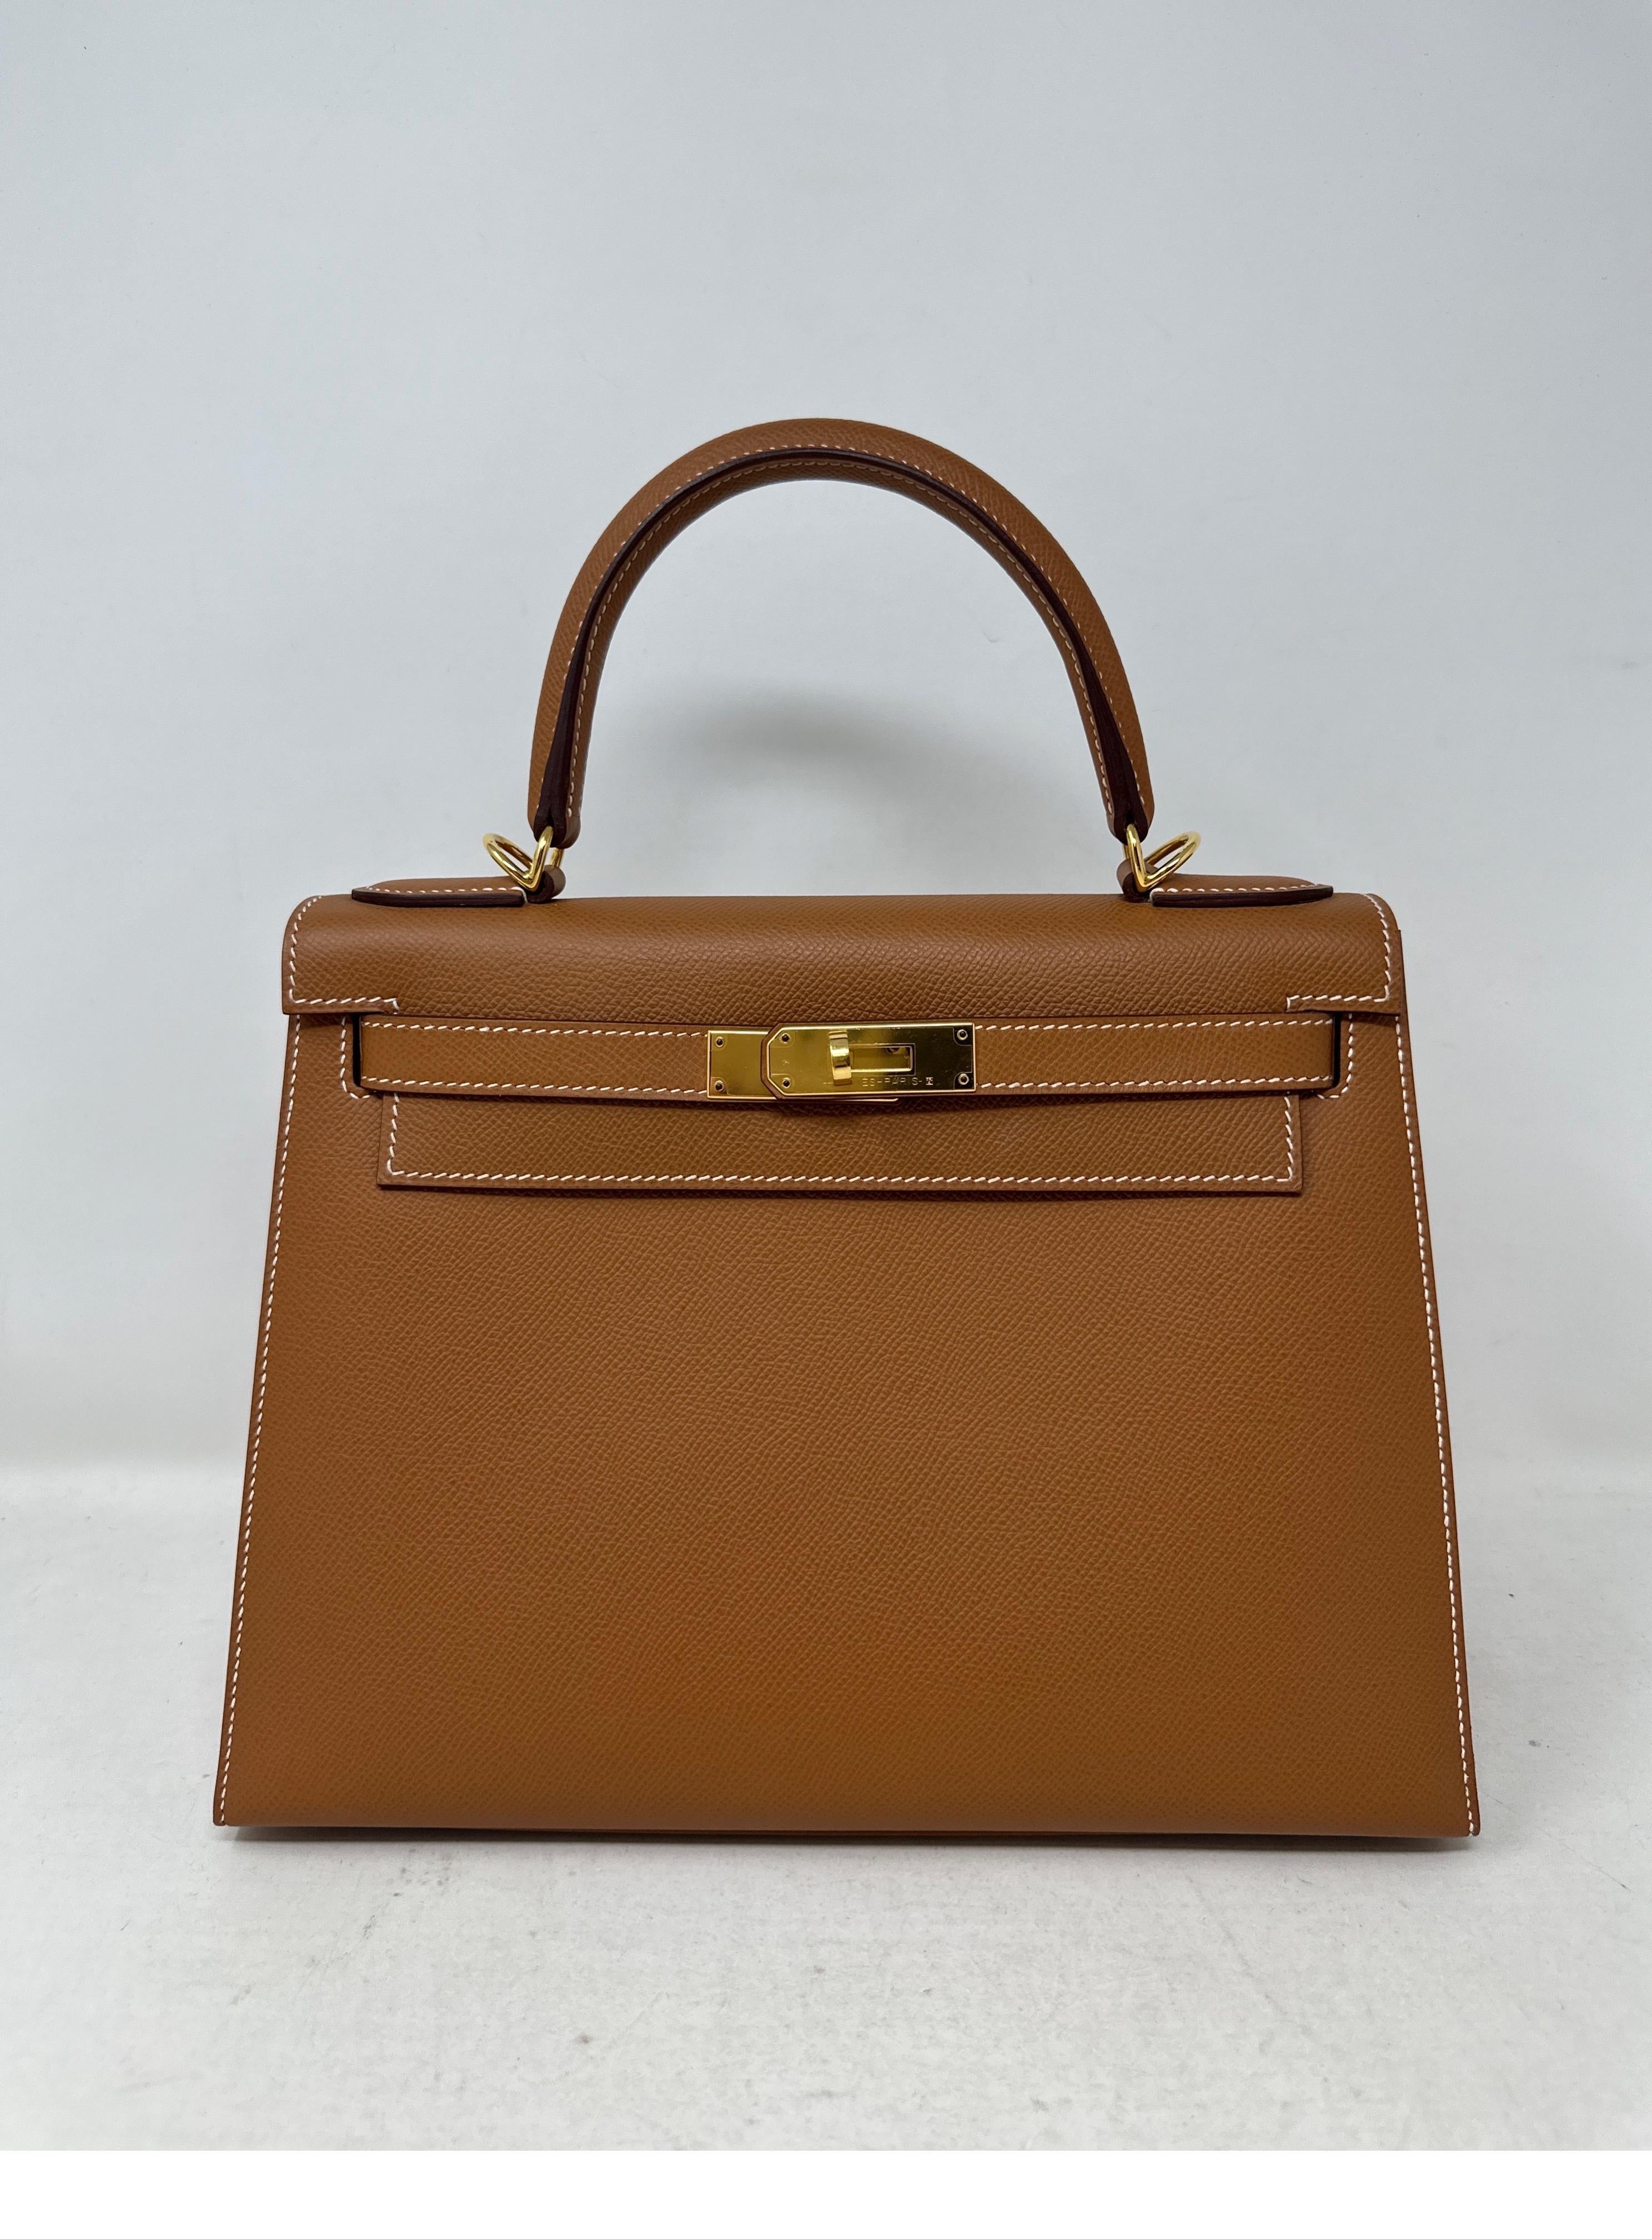 Hermes Gold Kelly 28 Bag. Sellier epsom leather. Beautiful gold tan color. Most wanted combination. Gold on gold. Like new condition. Never used. Includes clochette, lock, keys, and dust bag. Guaranteed authentic. 